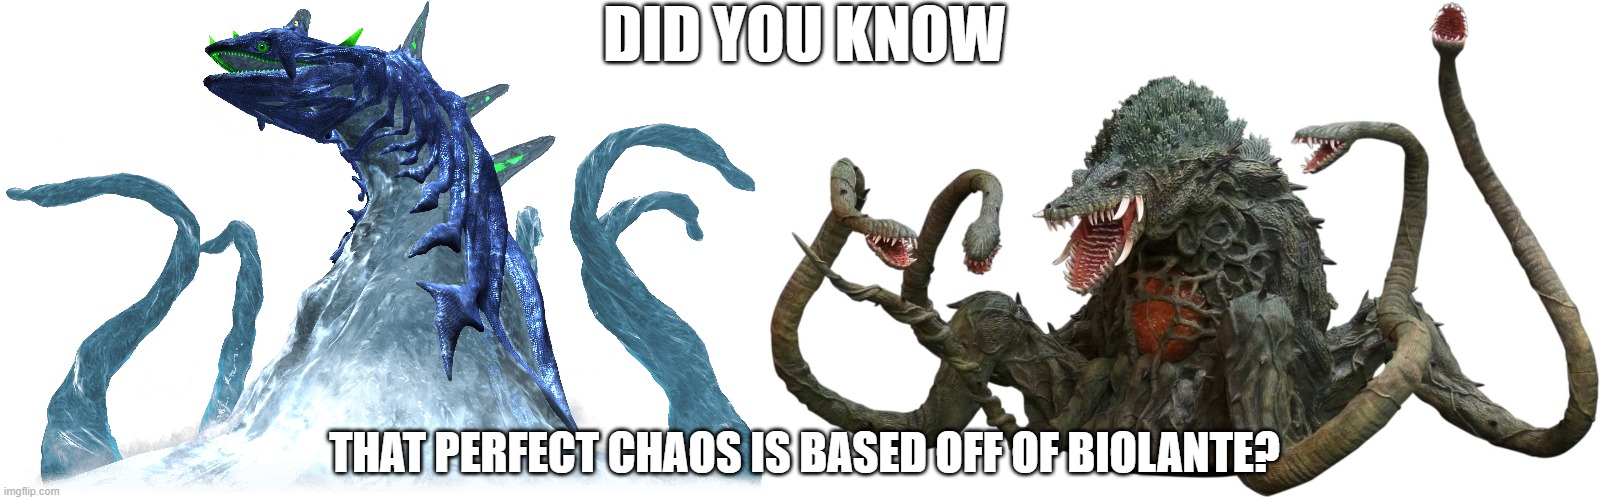 just a fun fact for yall. | DID YOU KNOW; THAT PERFECT CHAOS IS BASED OFF OF BIOLANTE? | made w/ Imgflip meme maker